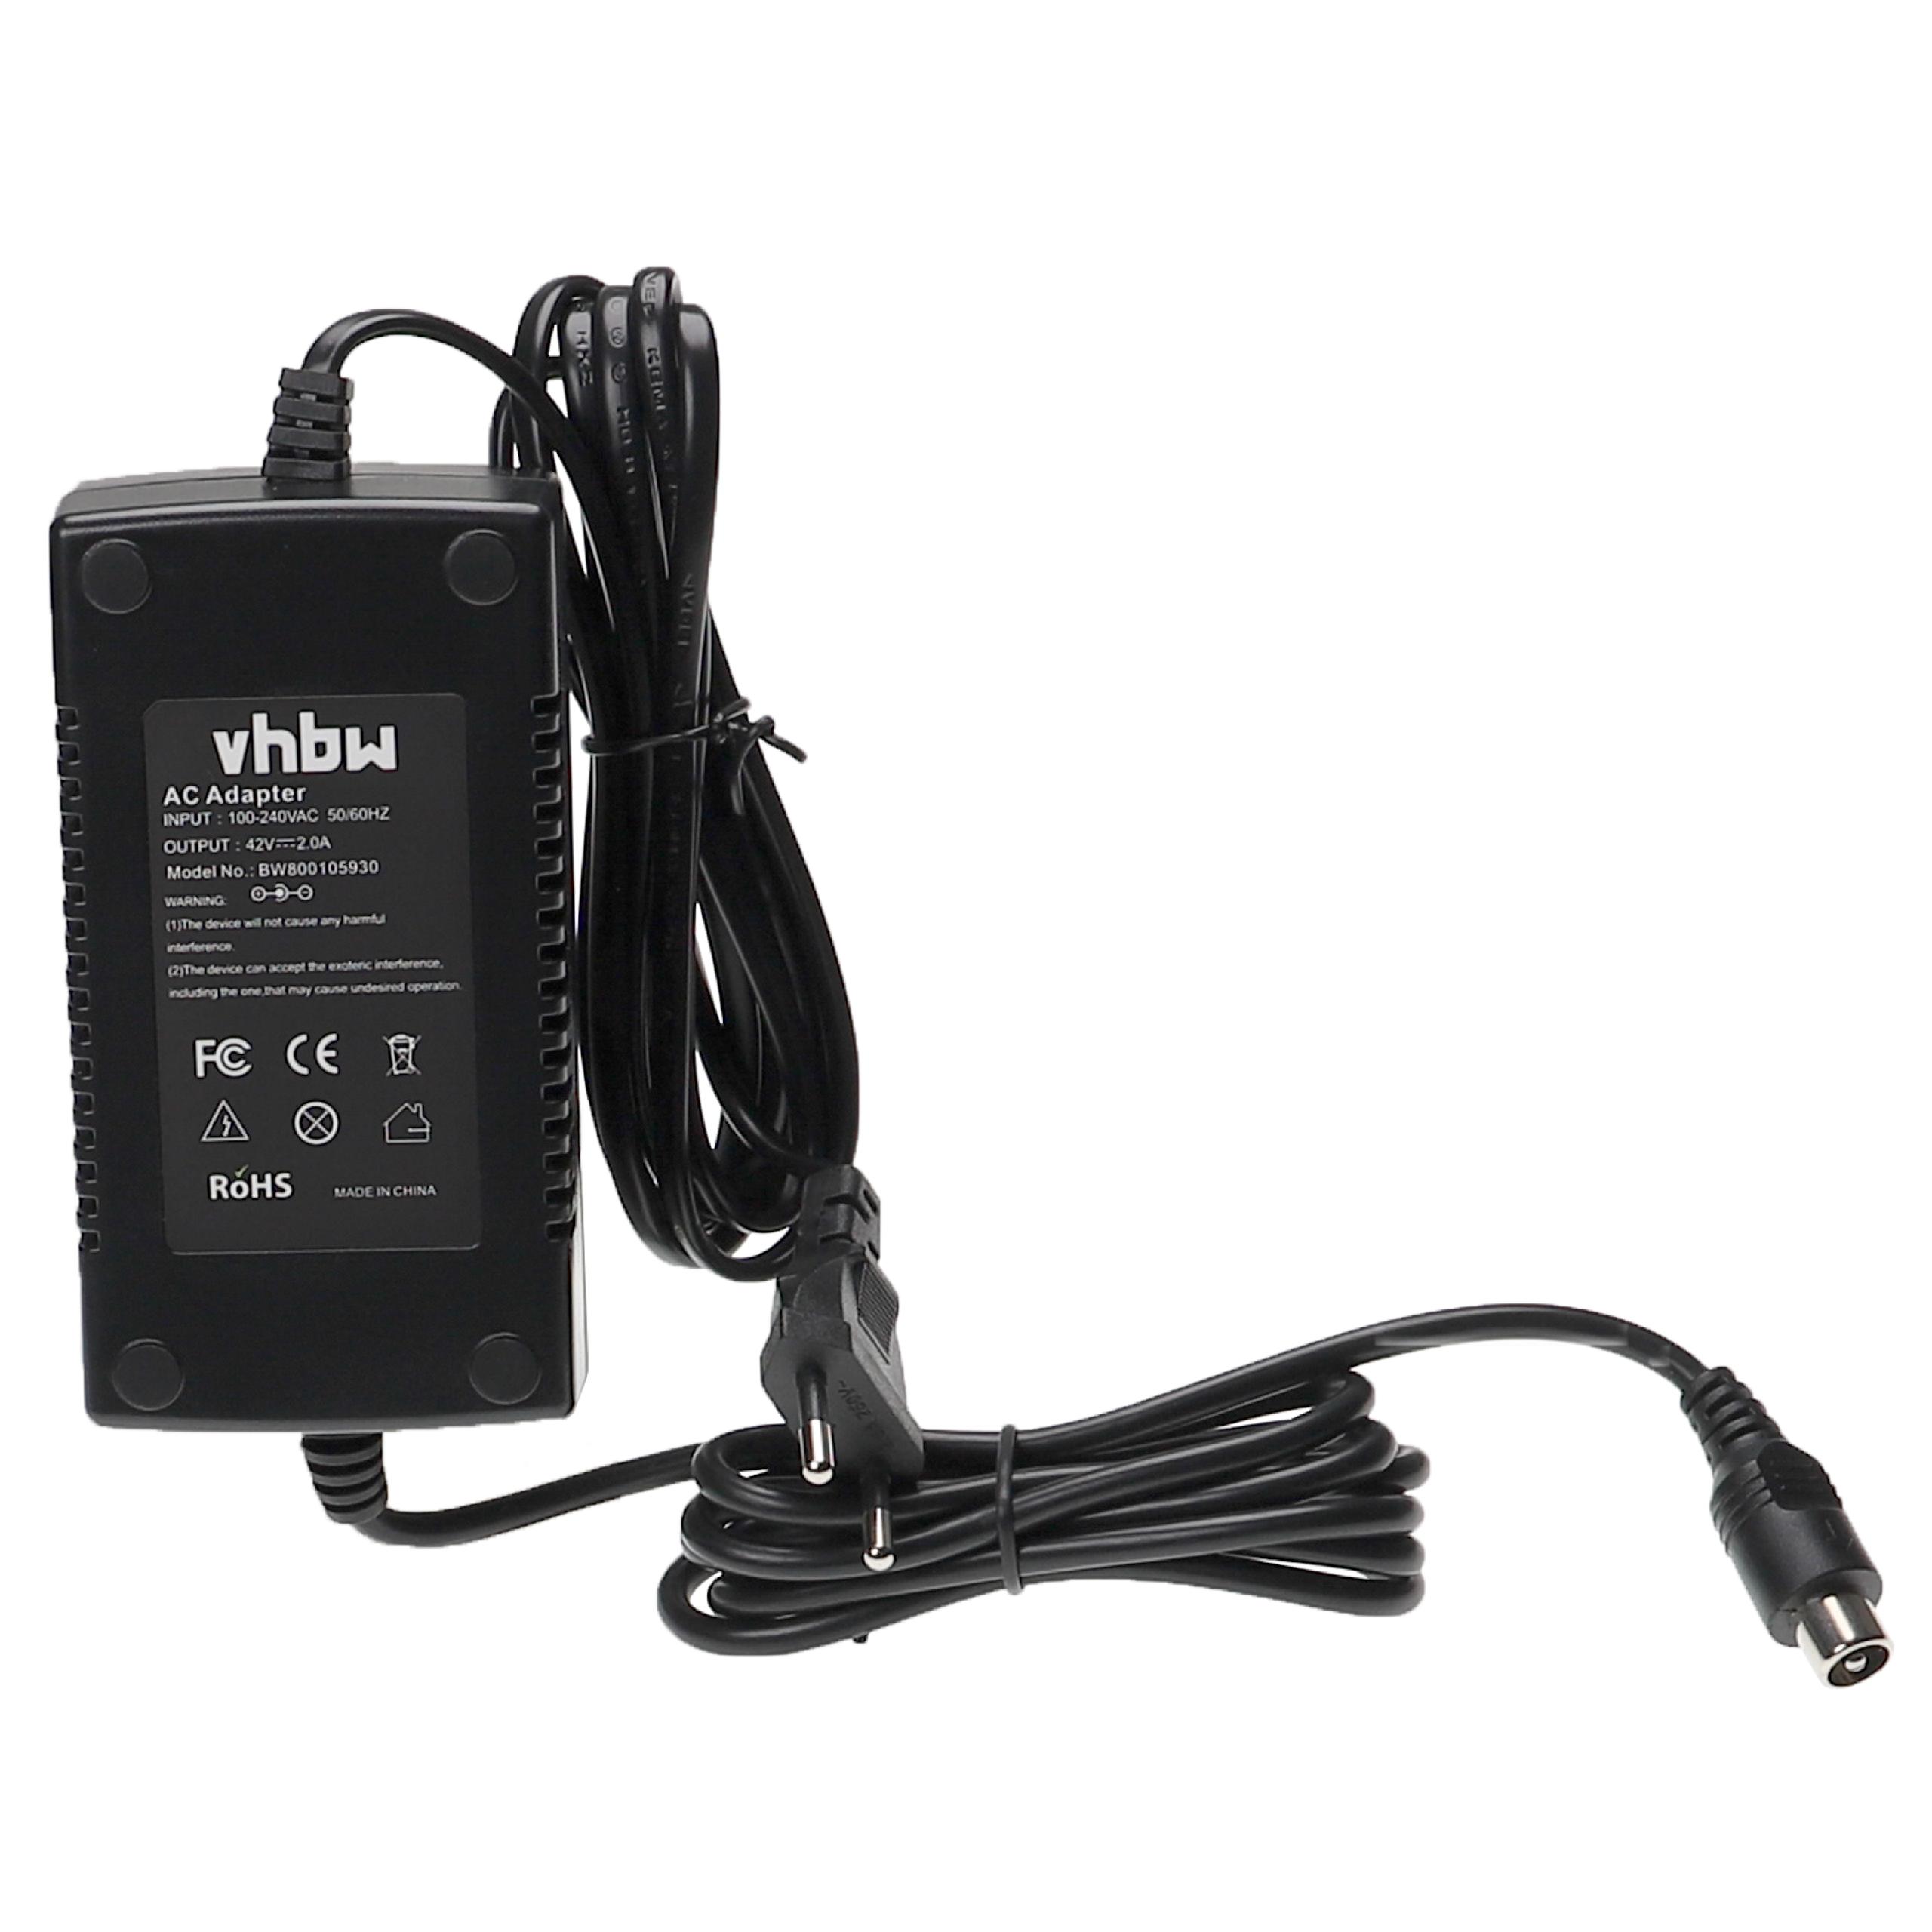 Charger suitable for Li-Ion E-Bike Battery - With 1 Pin Connector, 2.0 A